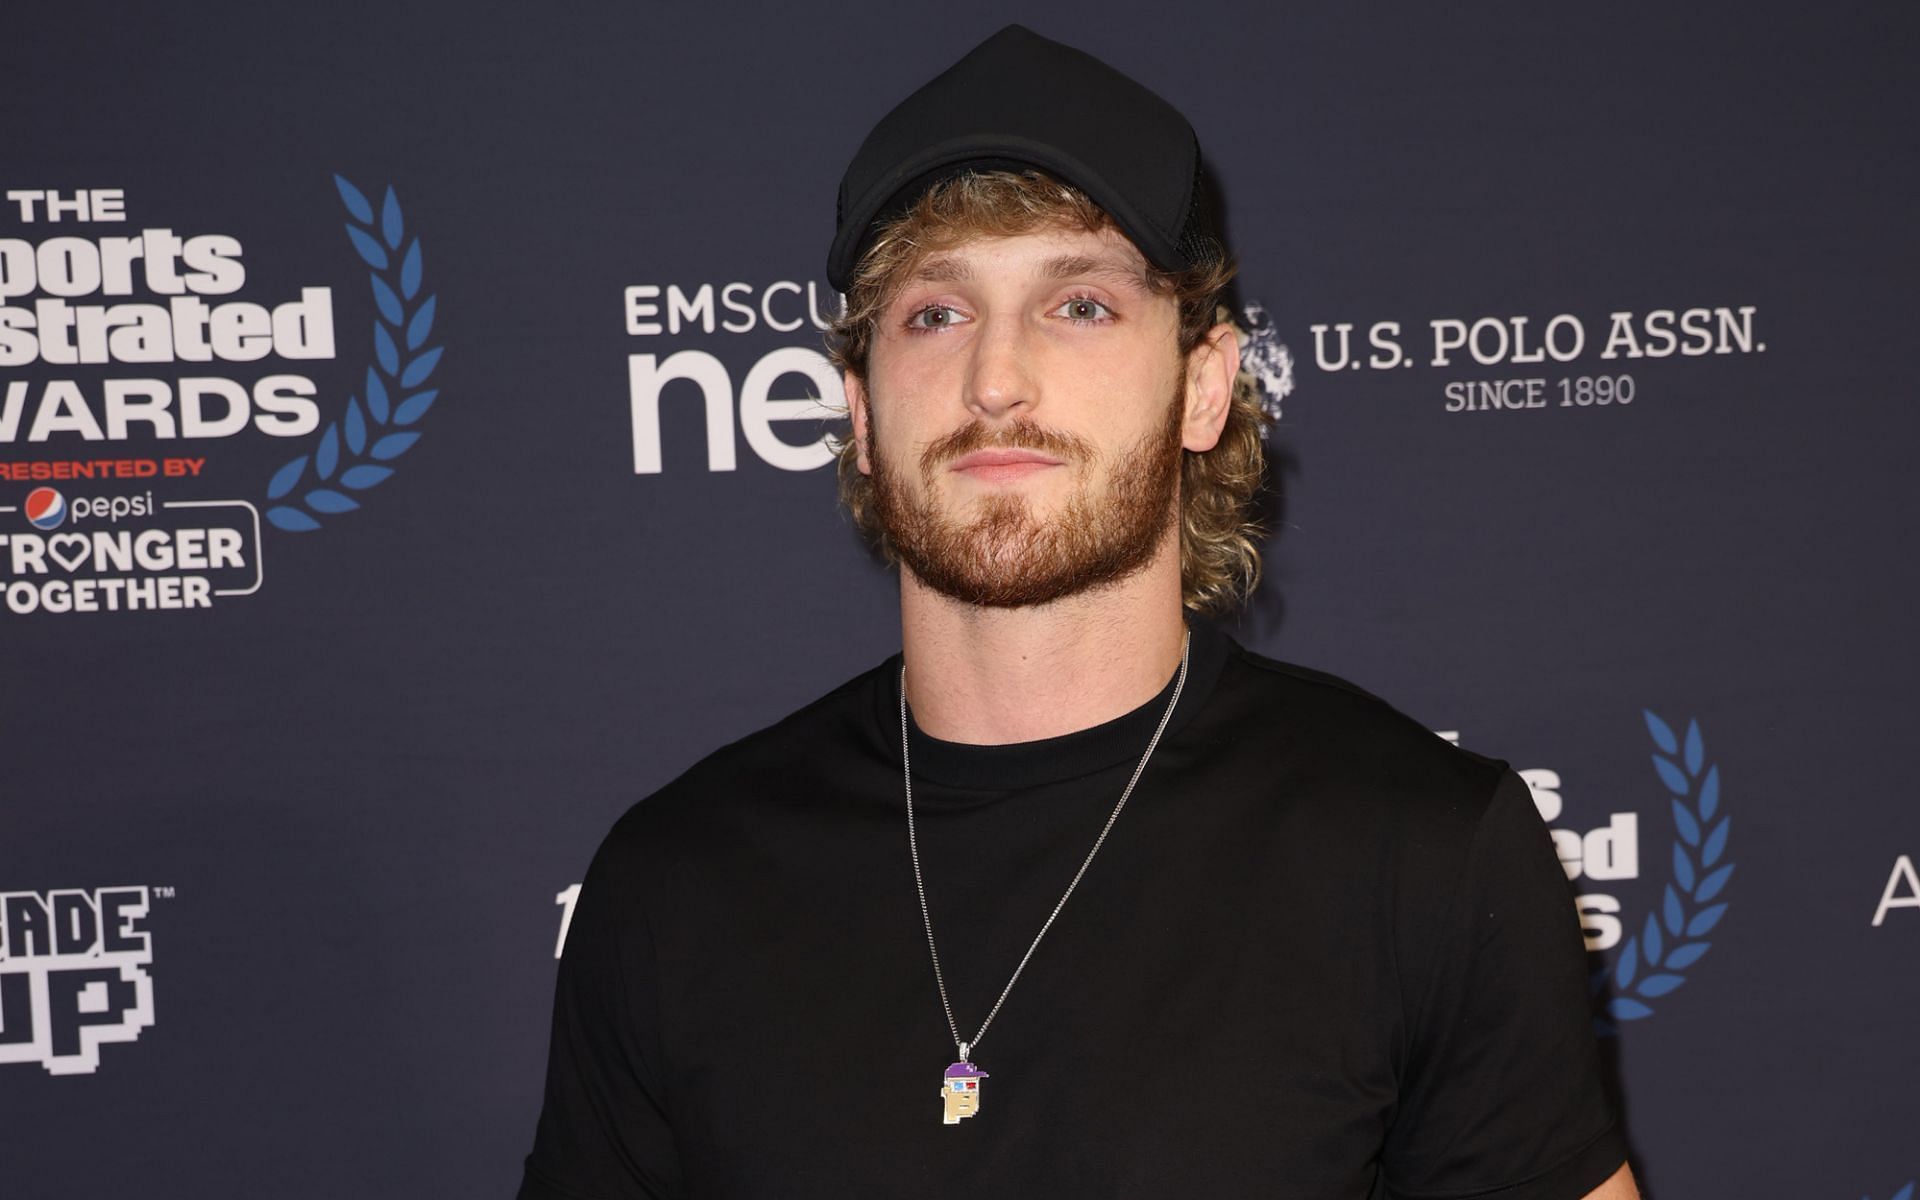 Logan Paul at the 2021 Sports Illustrated Awards inside the Seminole Hard Rock Hotel &amp; Casino complex in Hollywood, Florida